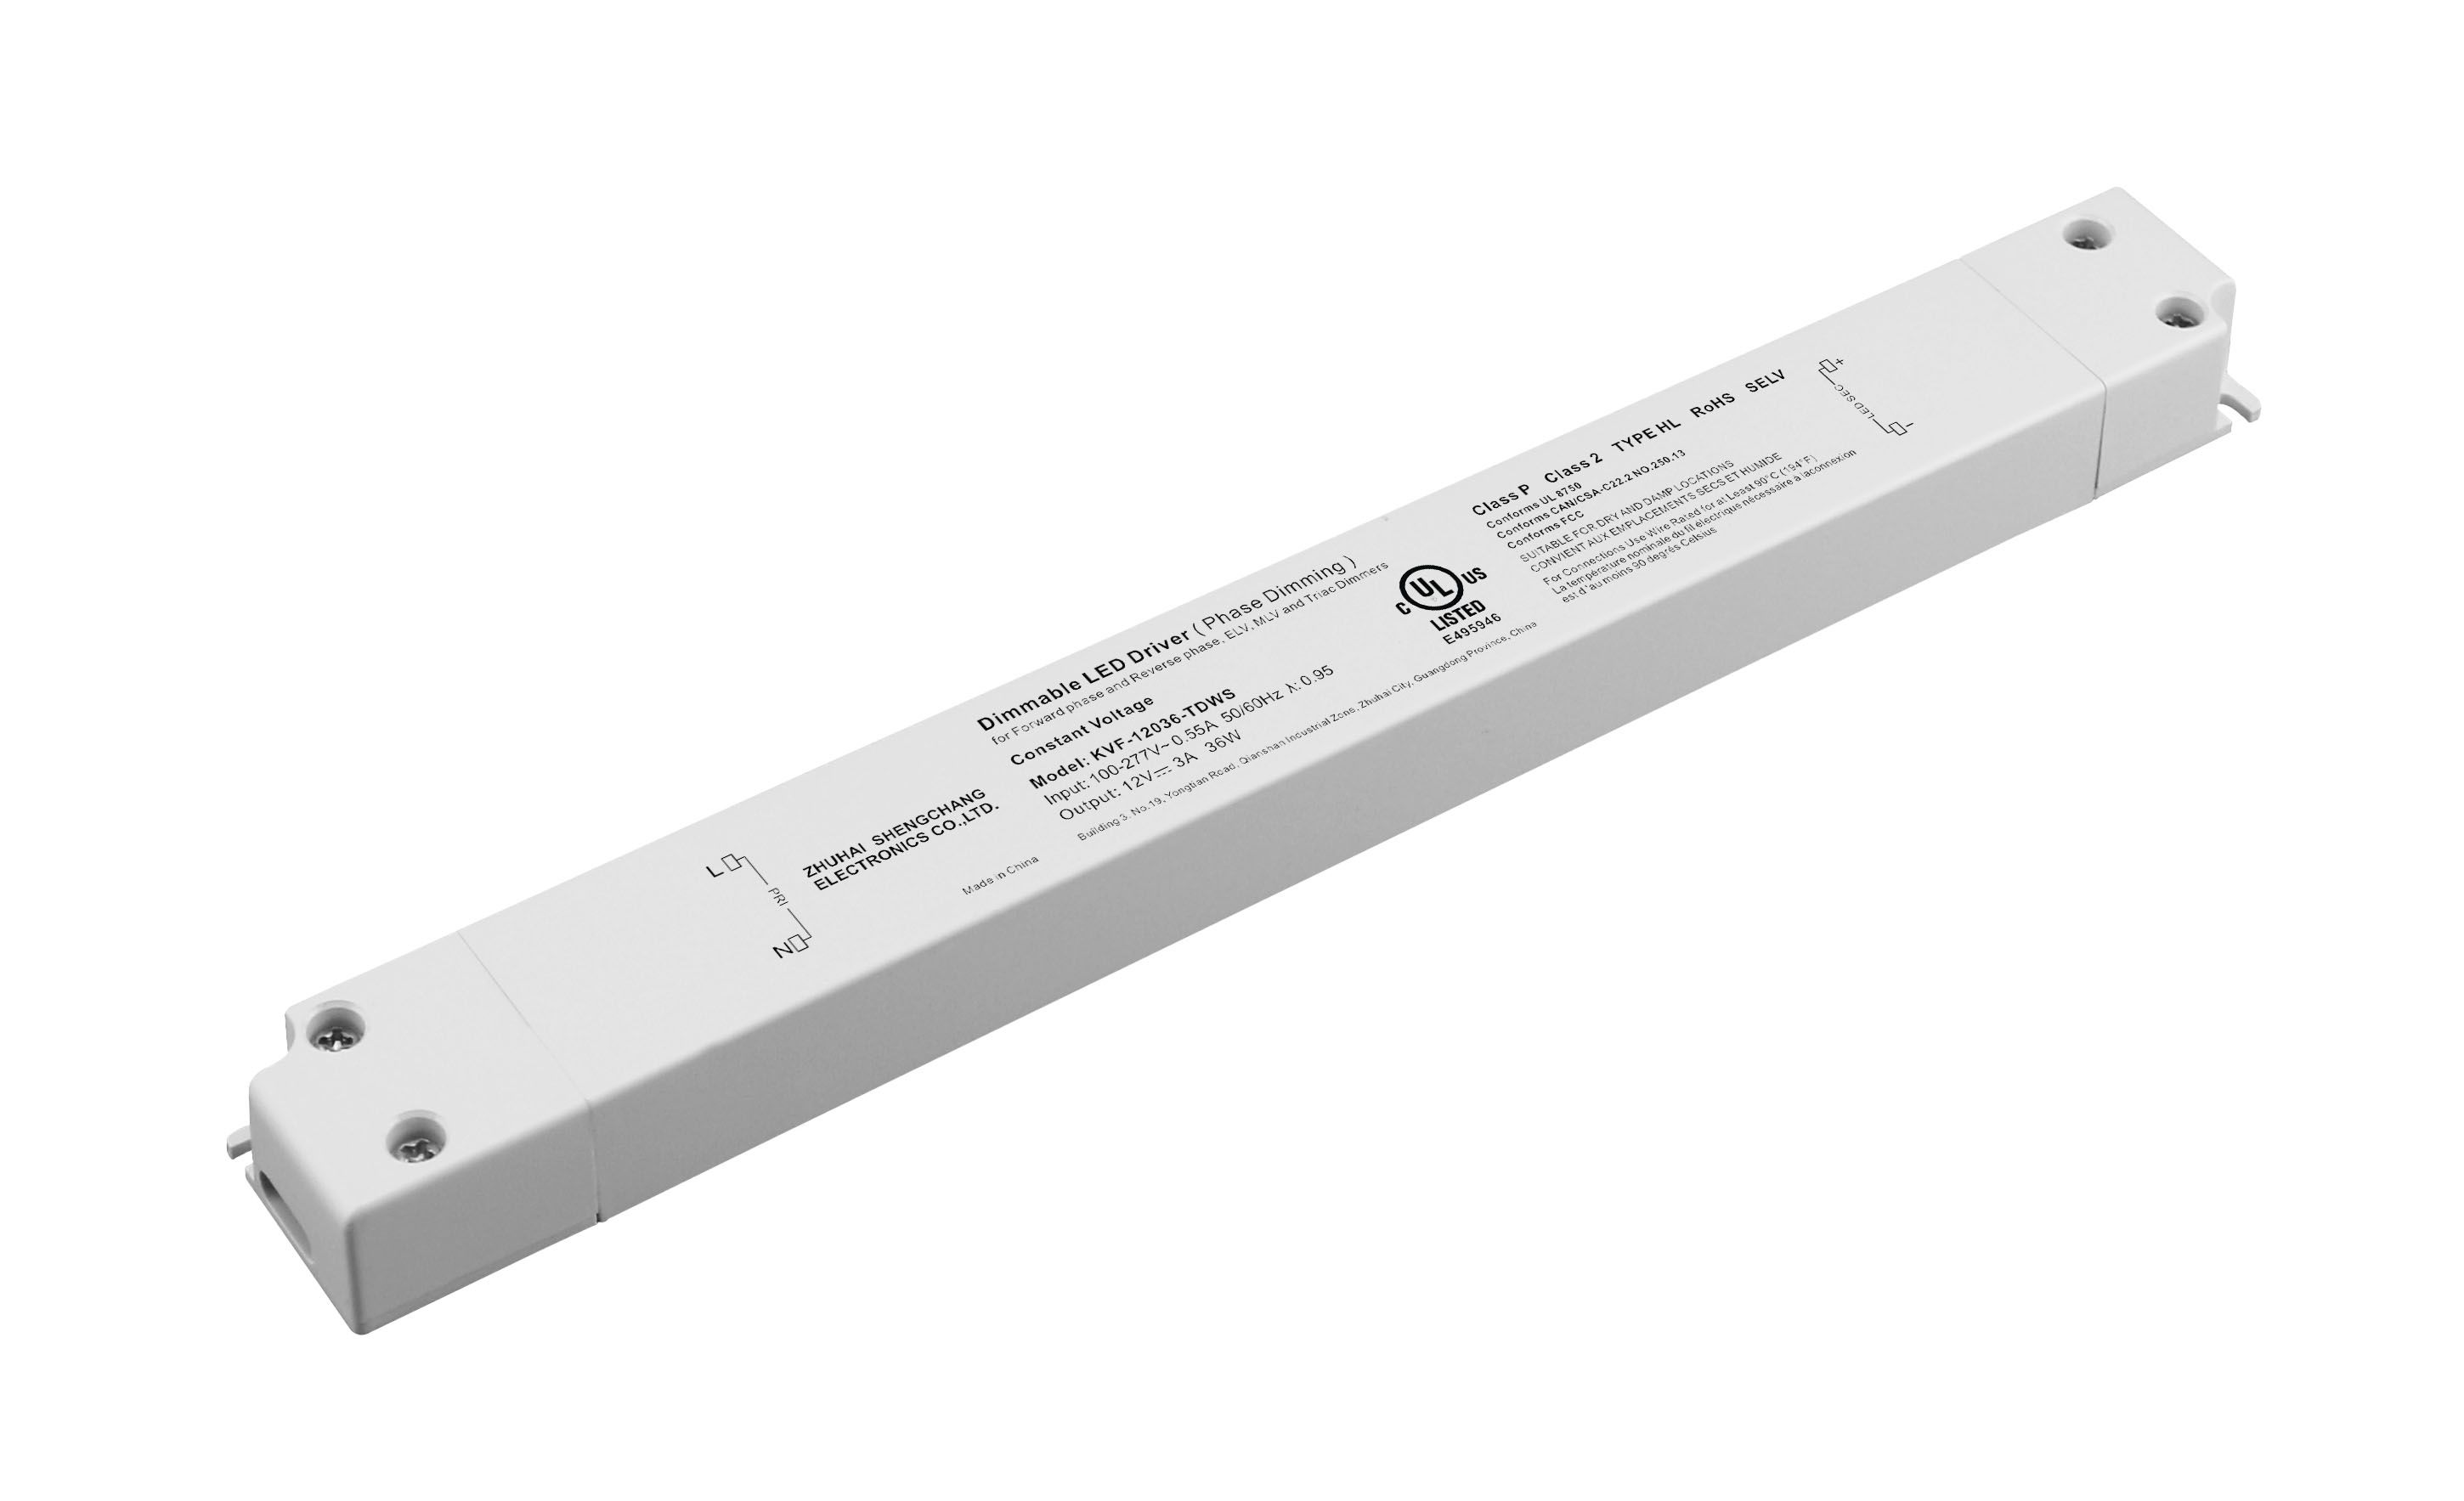 KVF-TDWS Series 36W Constant Voltage Triac Dimmable LED driver